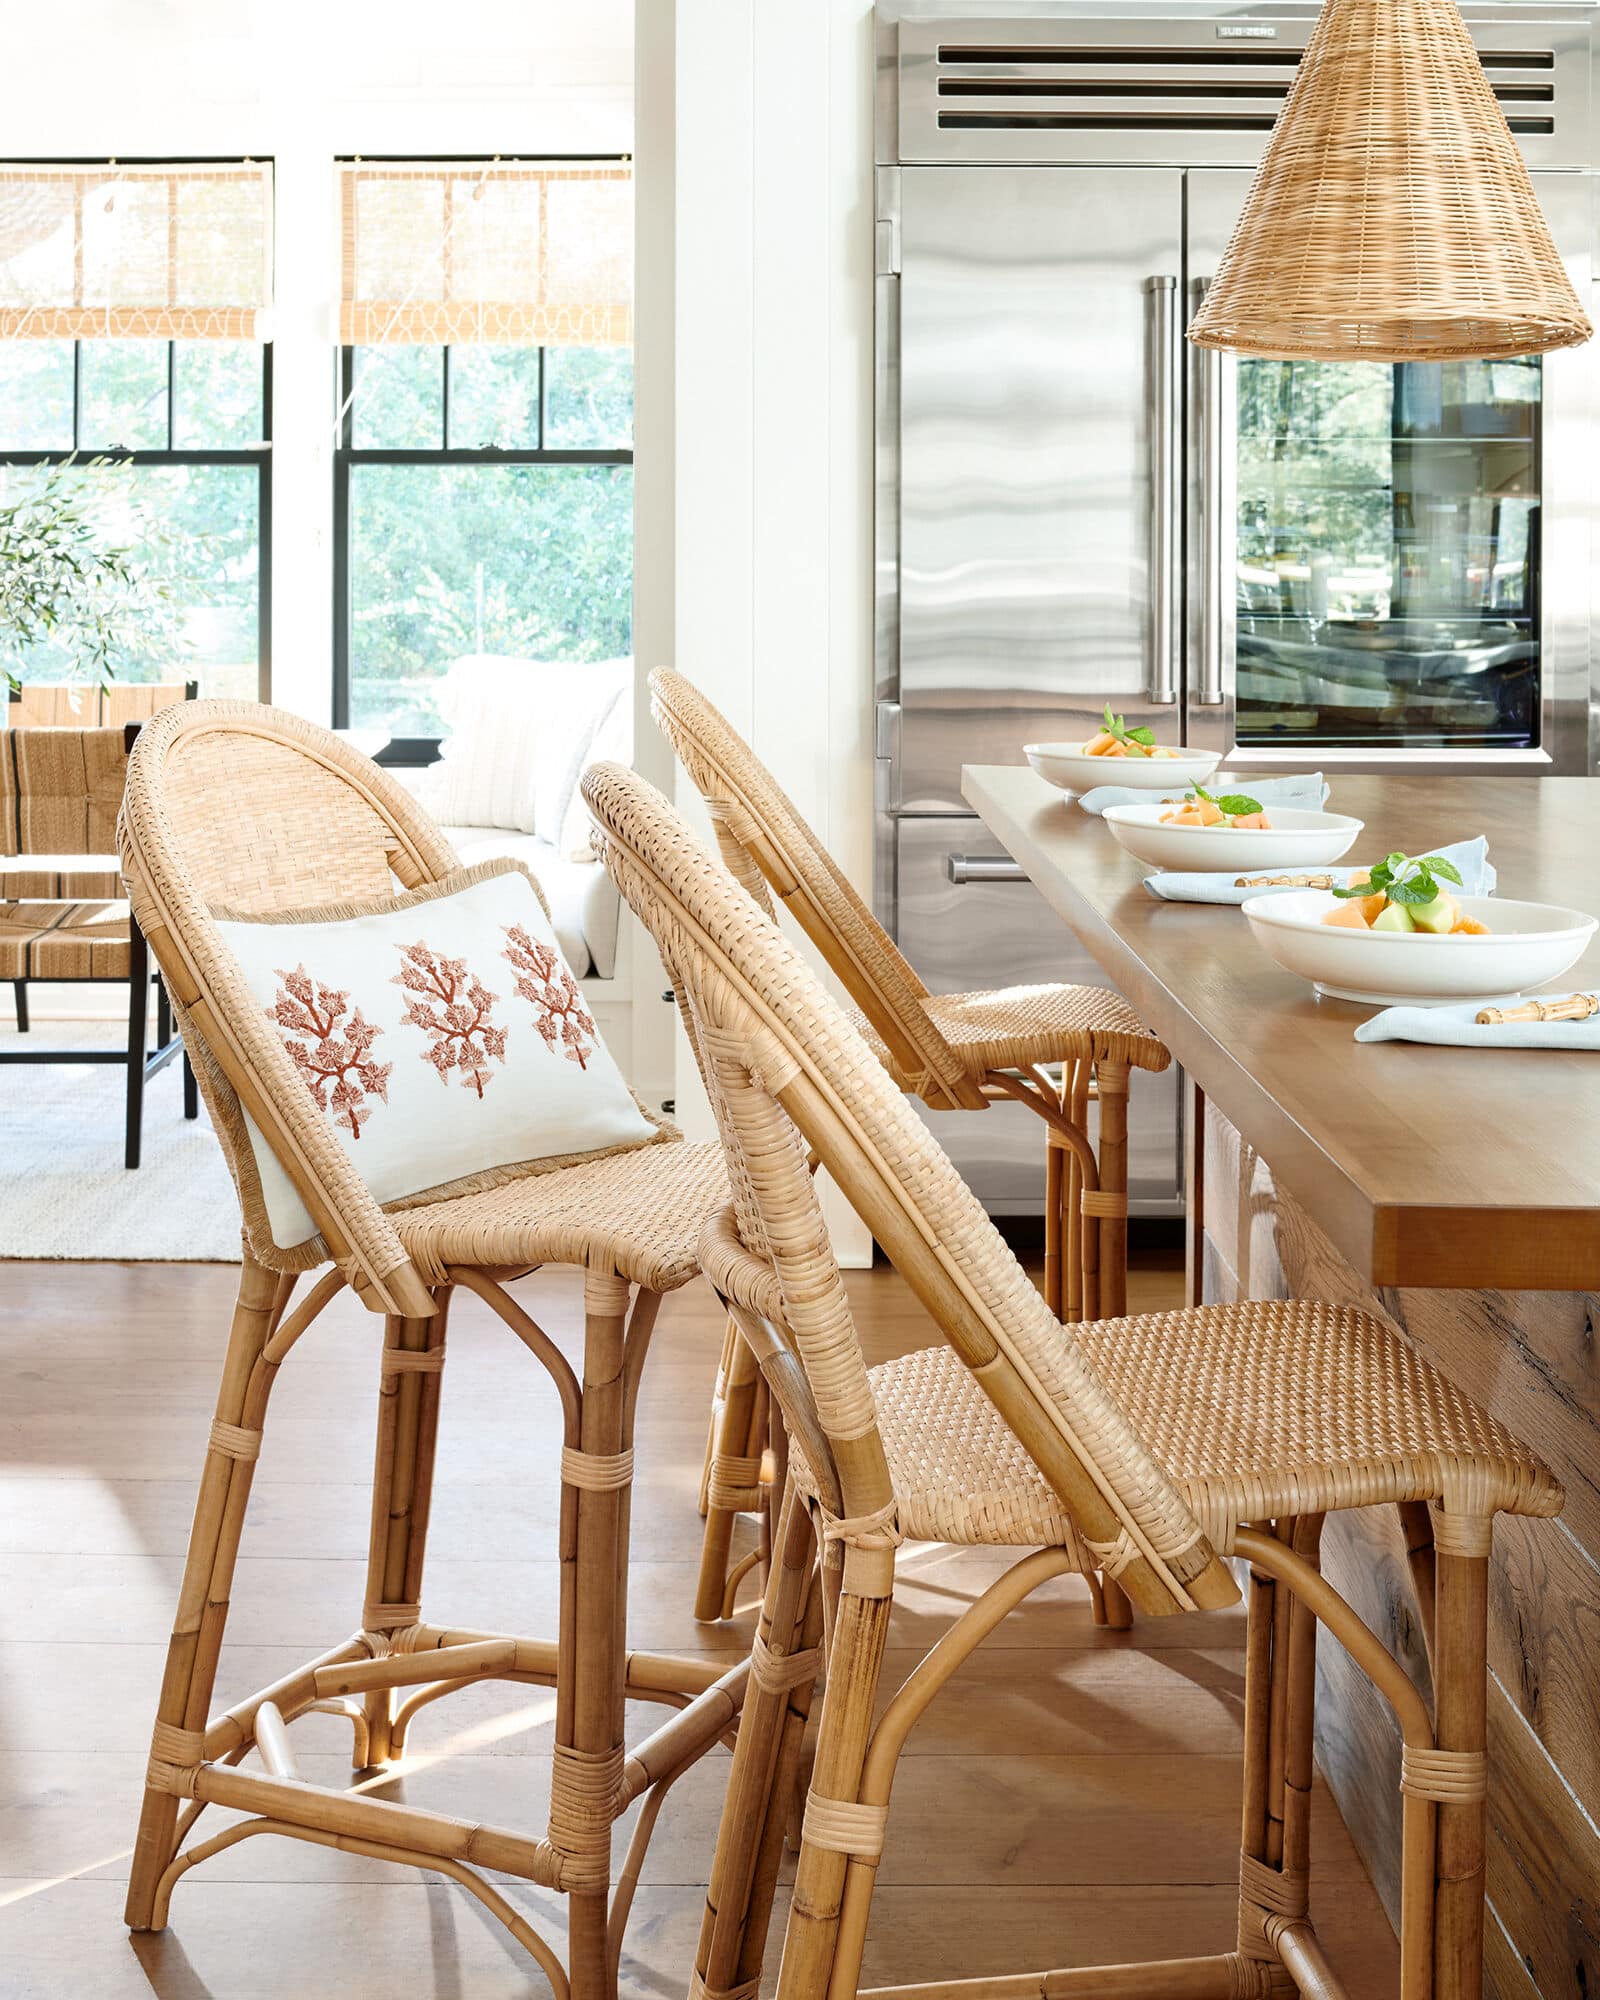 Favorite Stools for the Kitchen Island - serena & lily